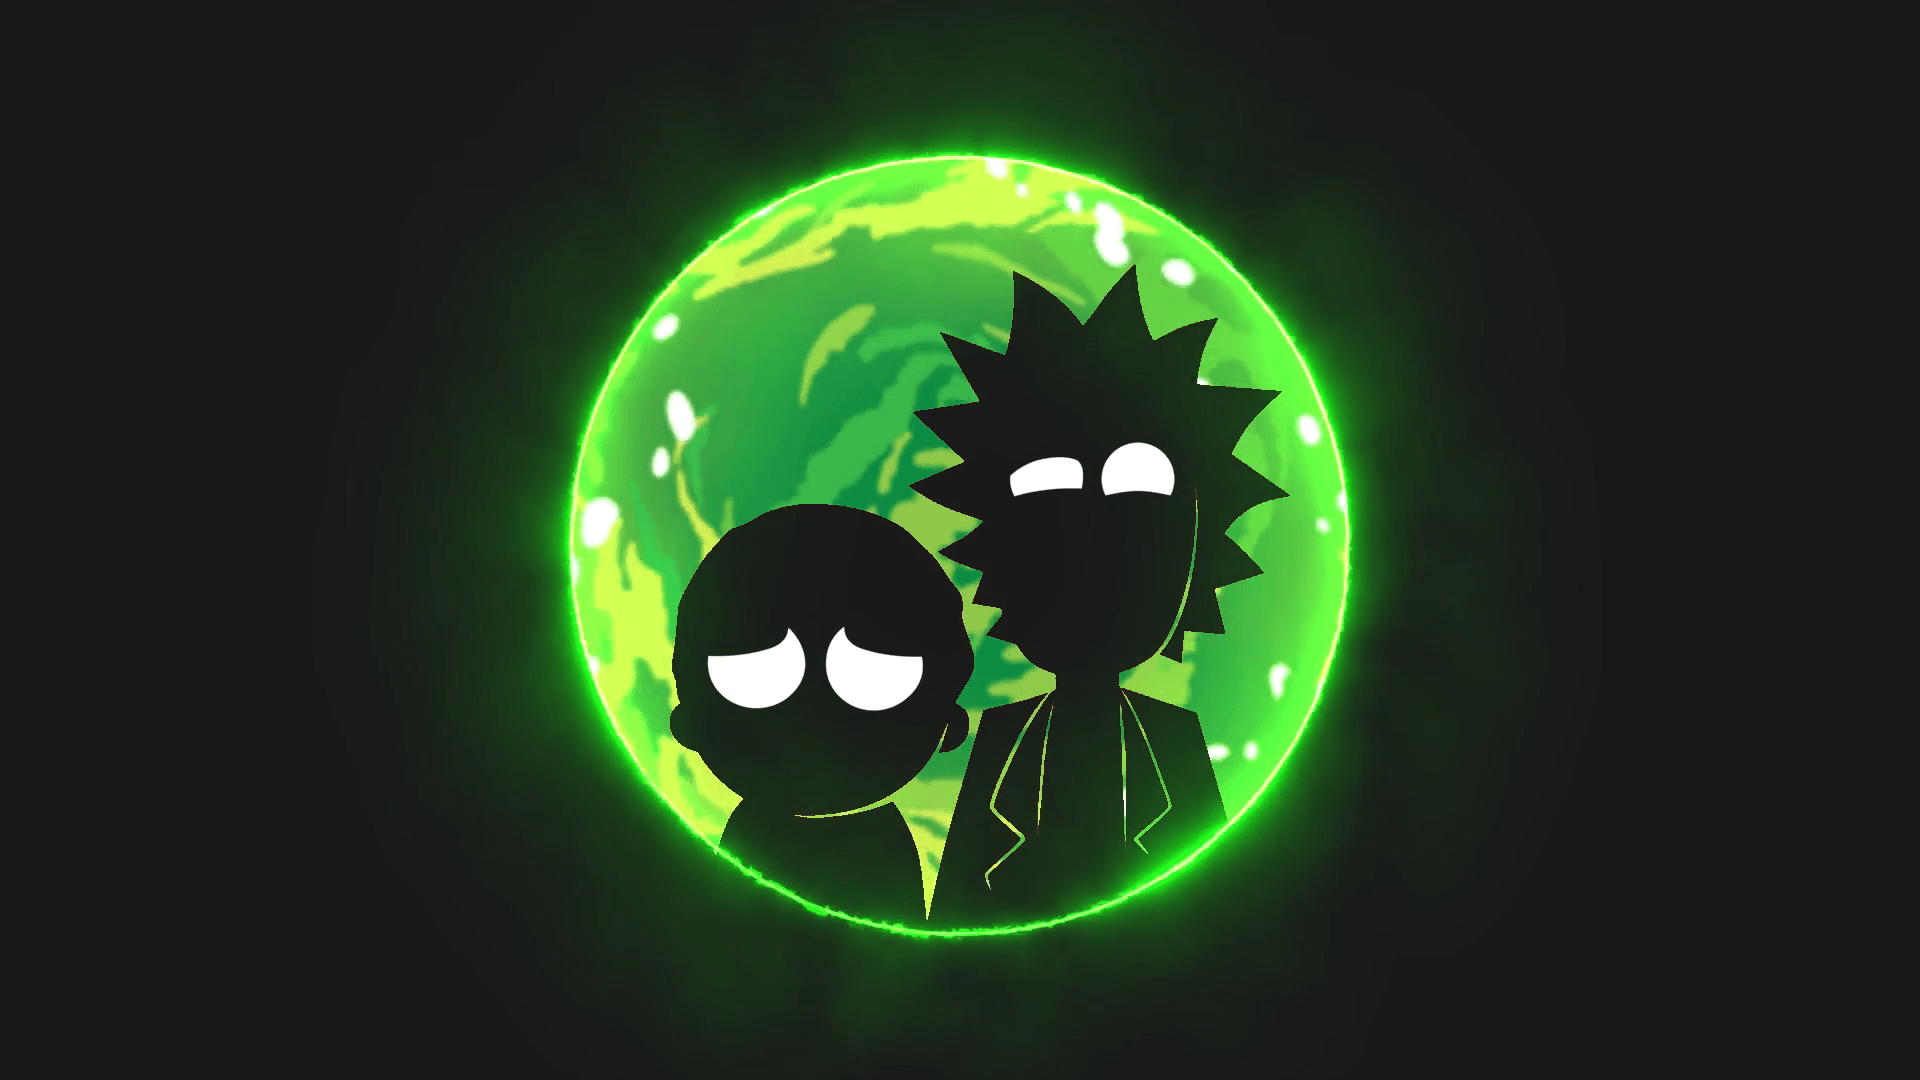 Rick and Morty Live Wallpaper